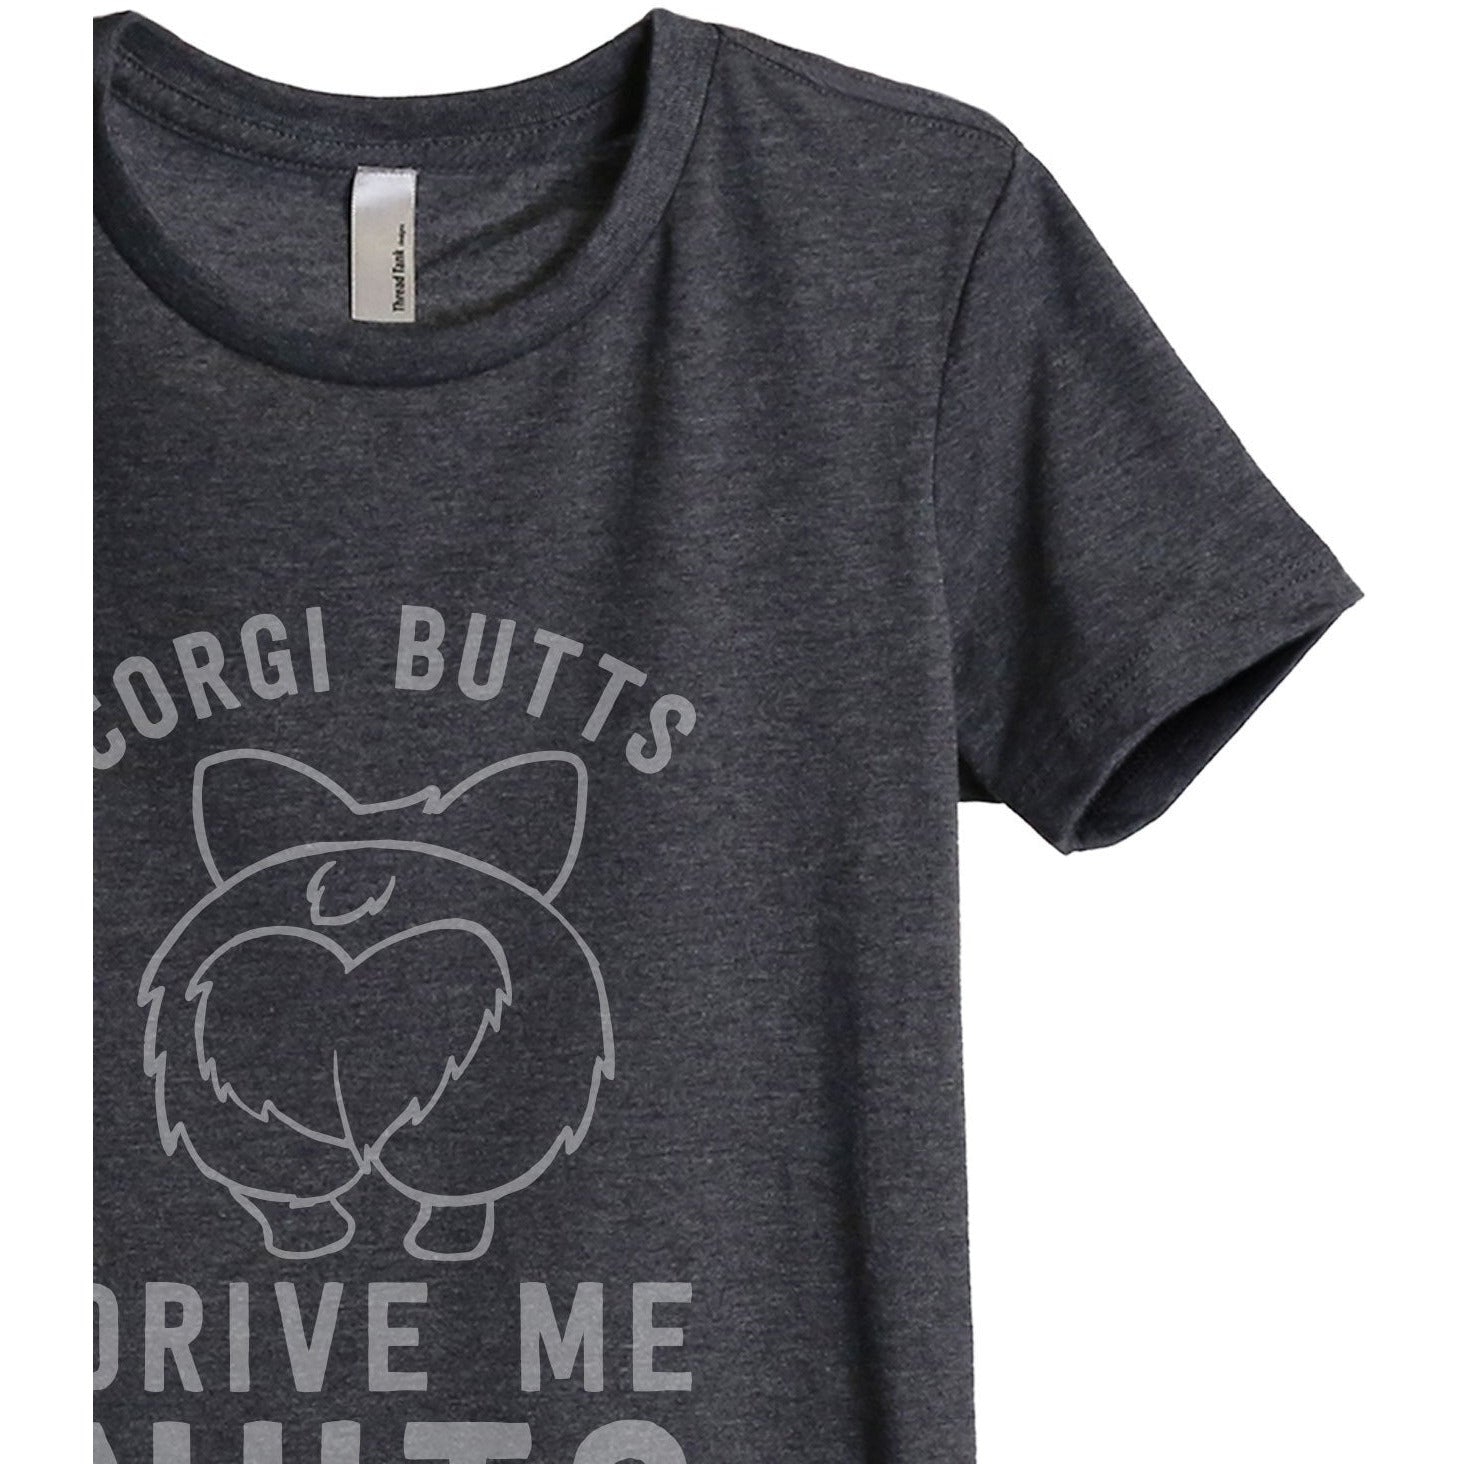 Corgi Butts Drive Me Nutts Women's Relaxed Crewneck T-Shirt Top Tee Charcoal Grey Zoom Details